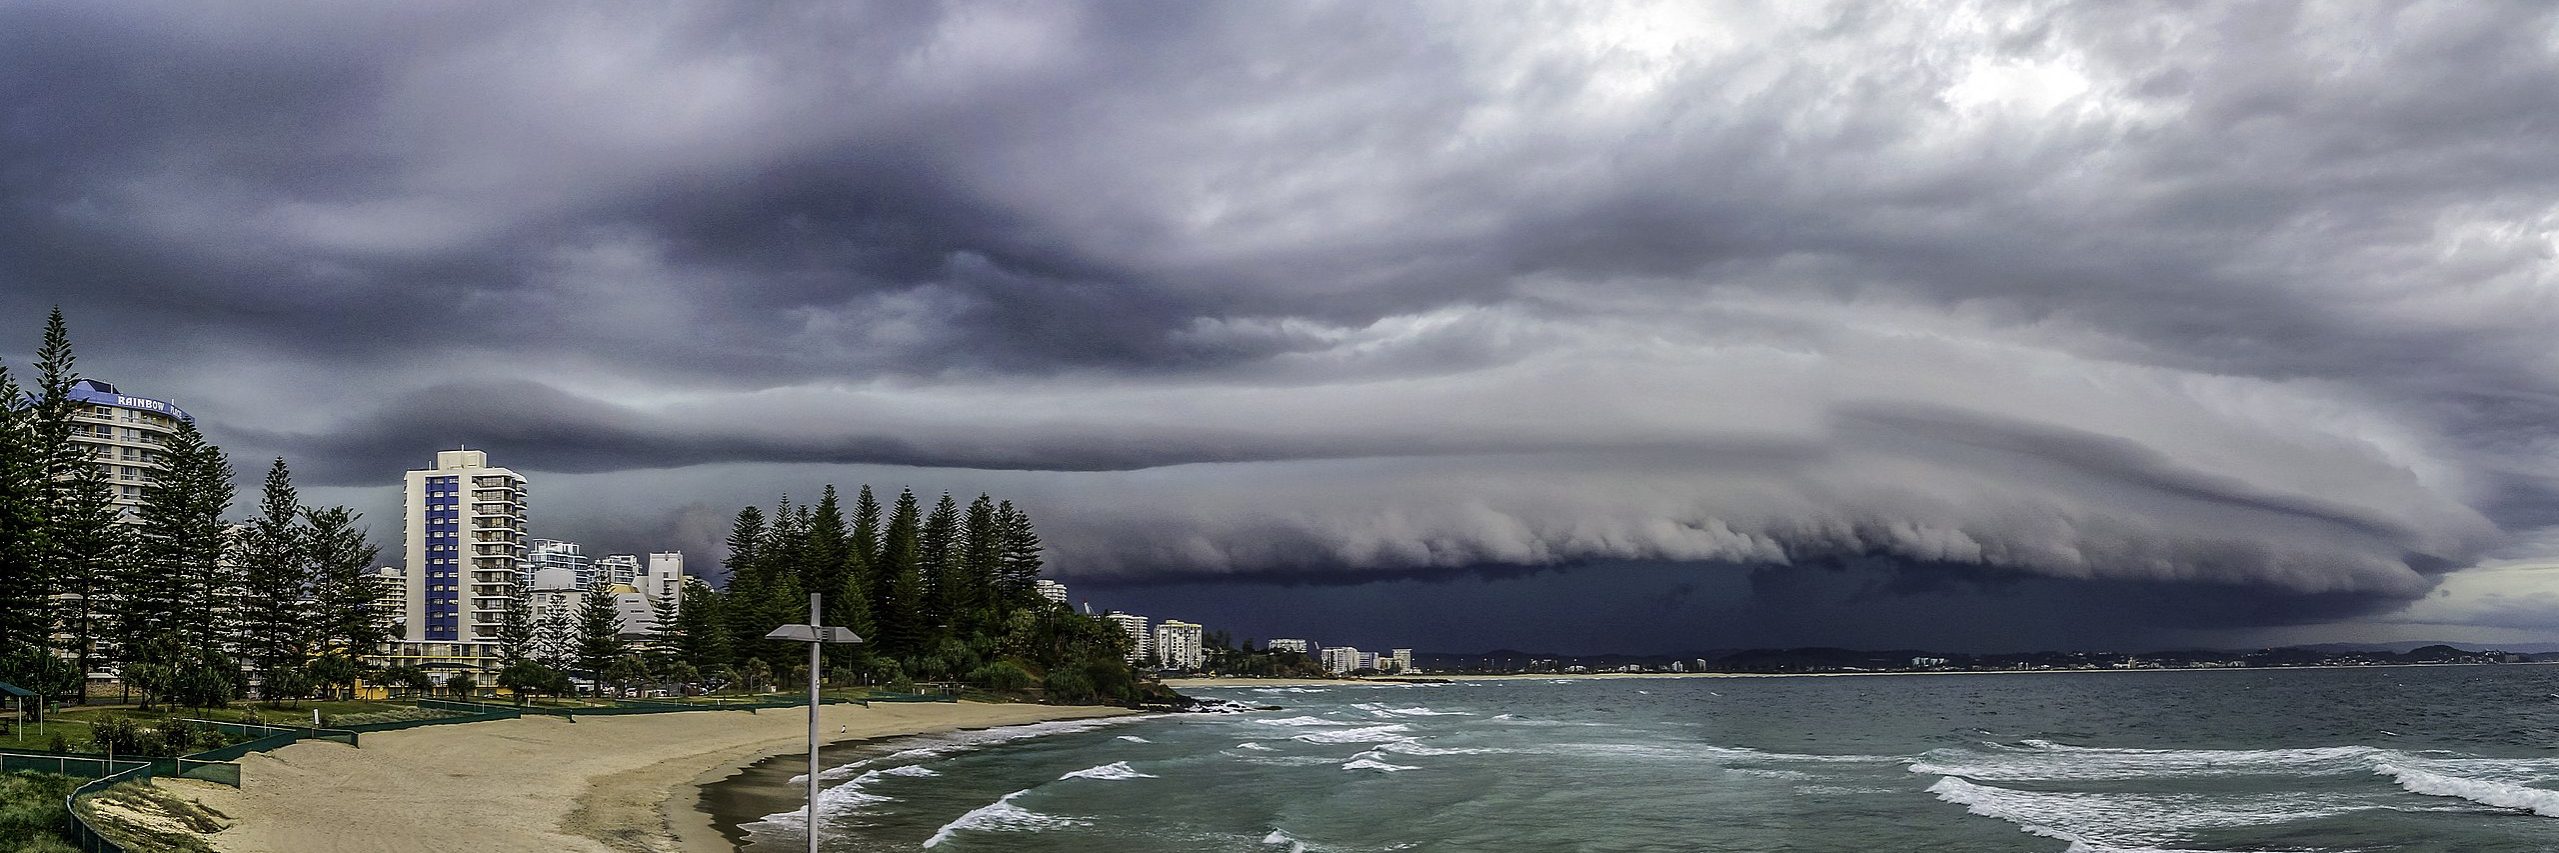 Storms move in over Kirra, on the Gold Coast, Queensland.